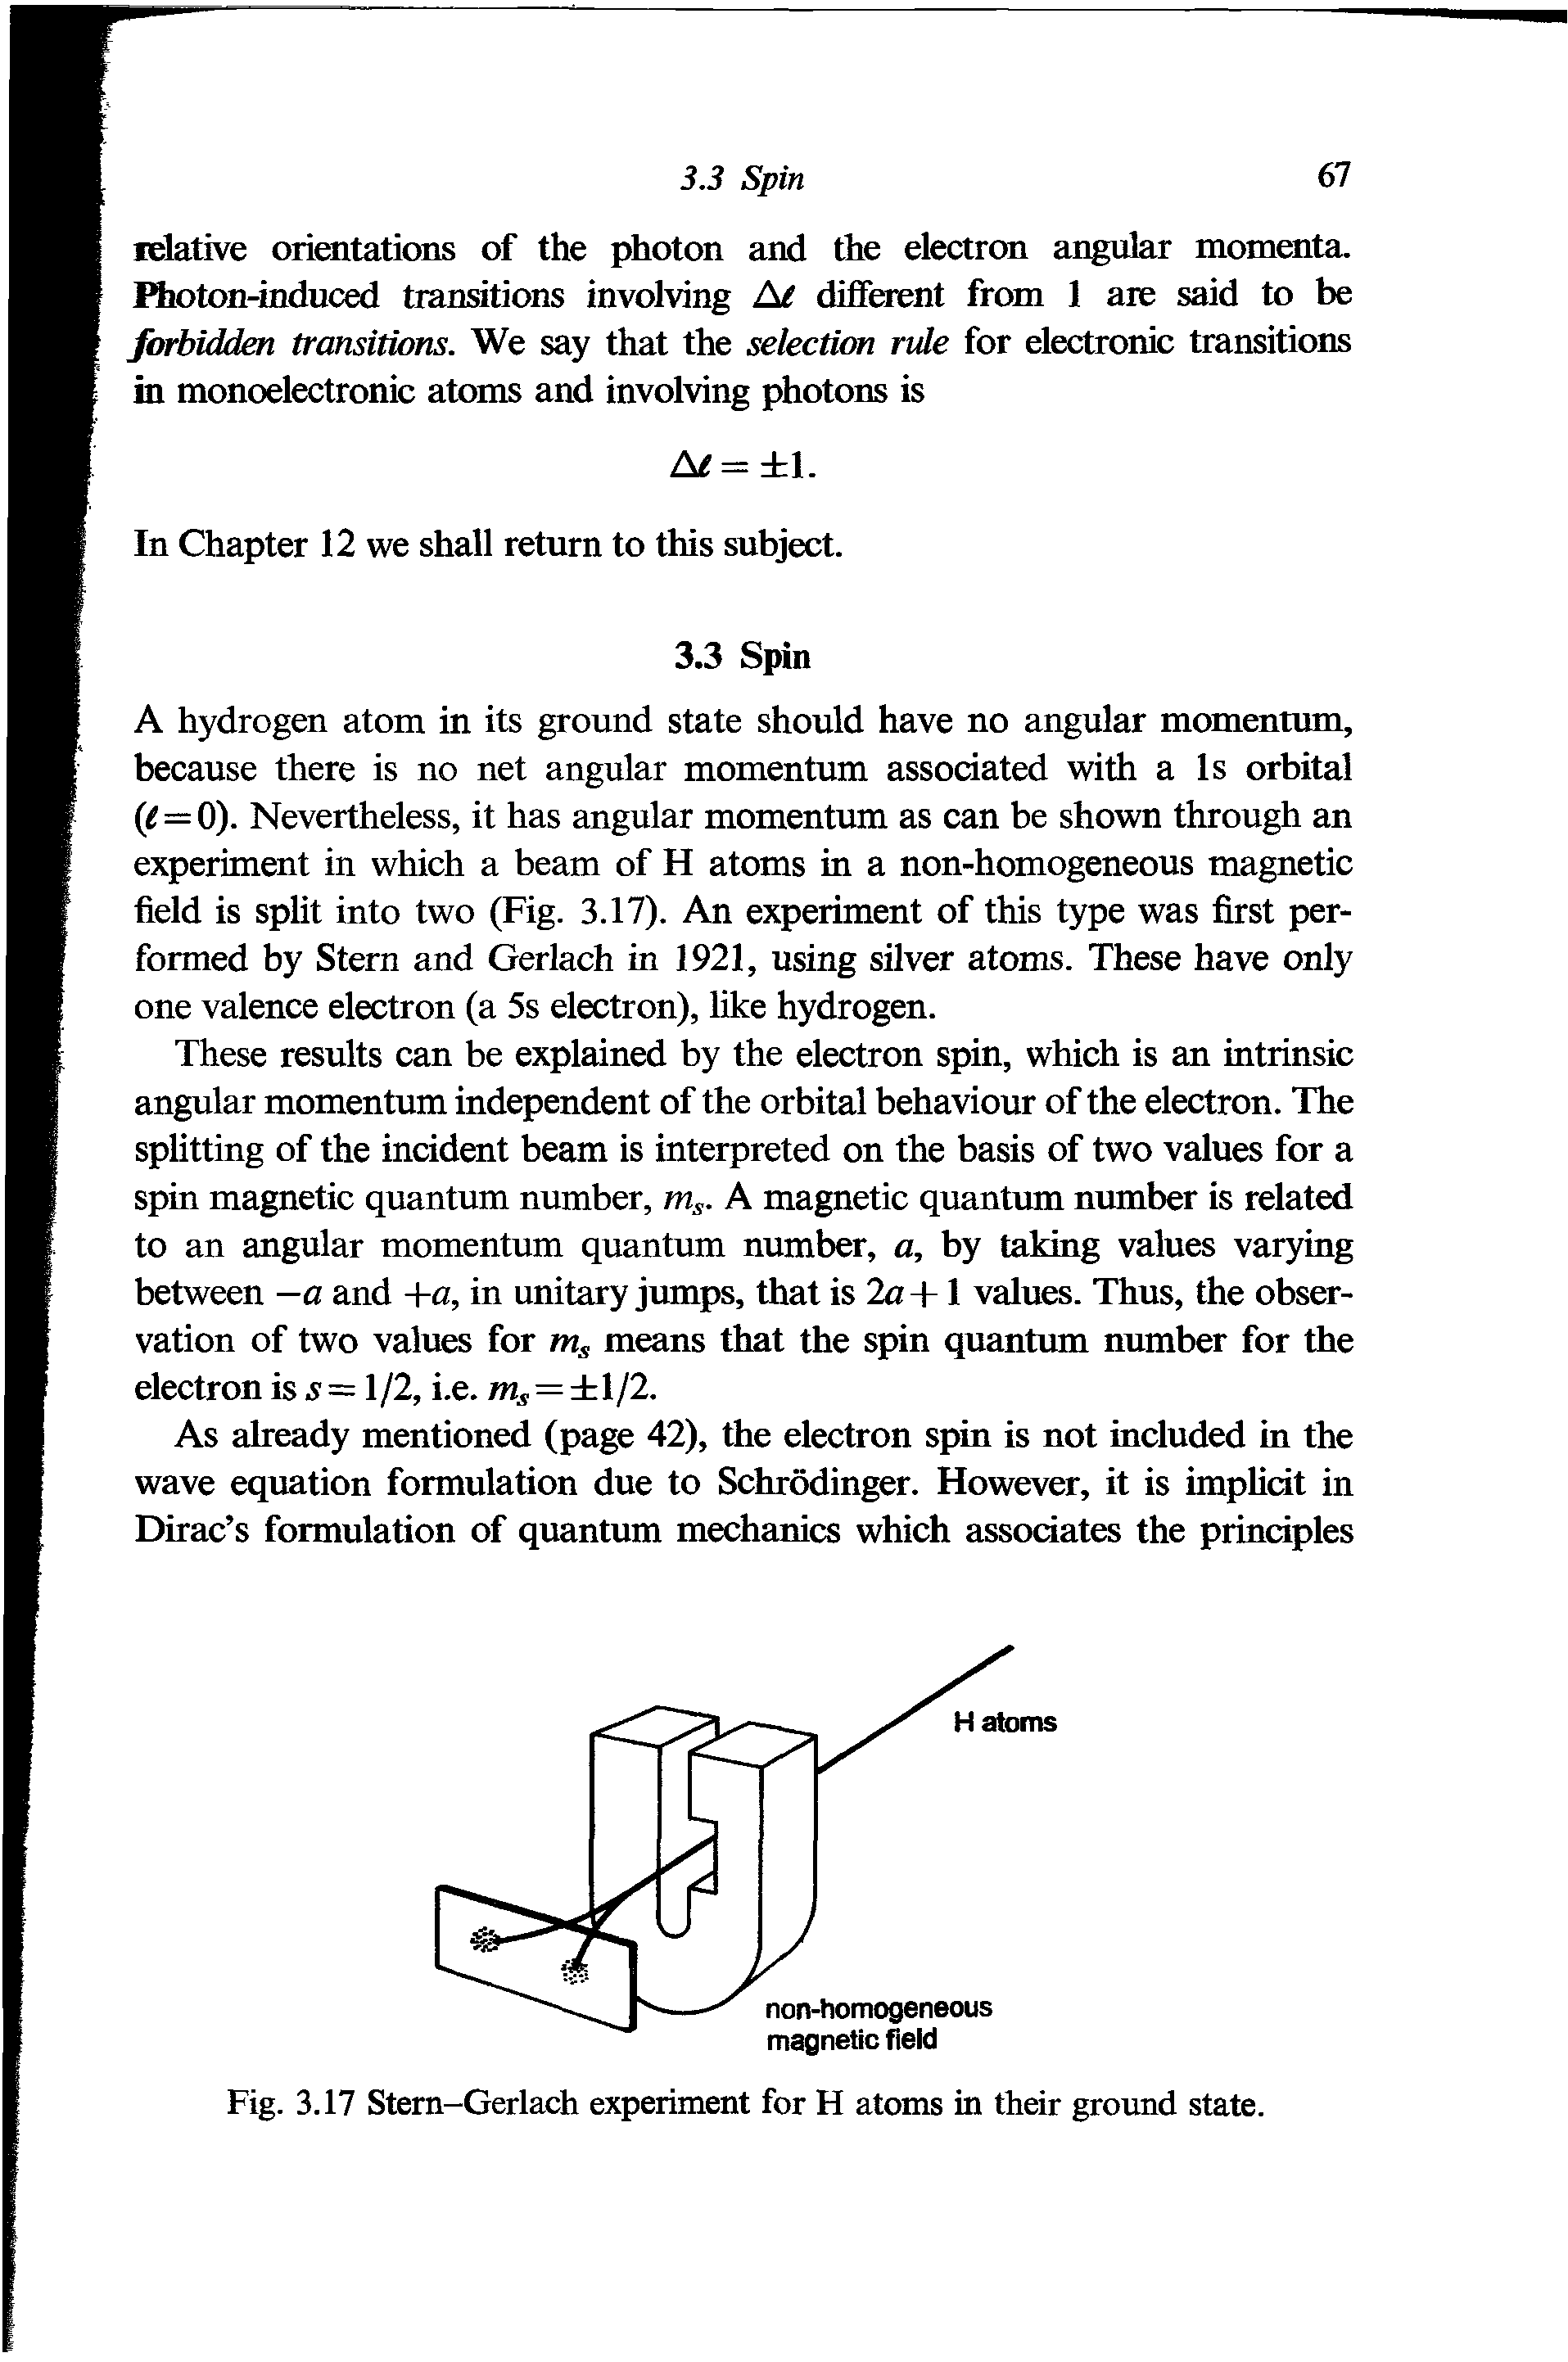 Fig. 3.17 Stern-Gerlach experiment for H atoms in their ground state.